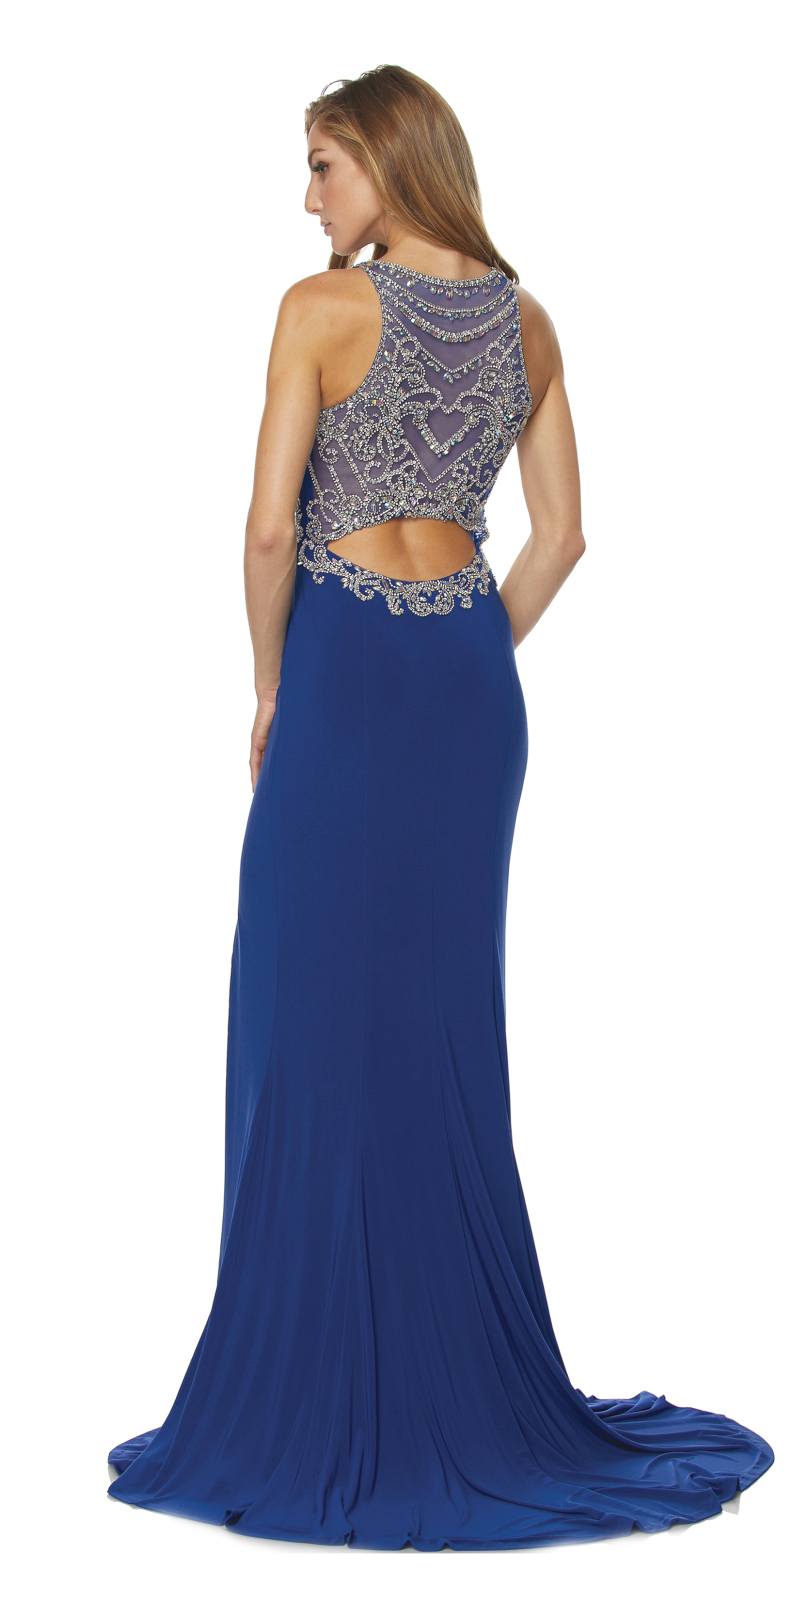 Juliet 616 Royal Blue Cut Out Back Beaded Bodice Prom Gown with Train 